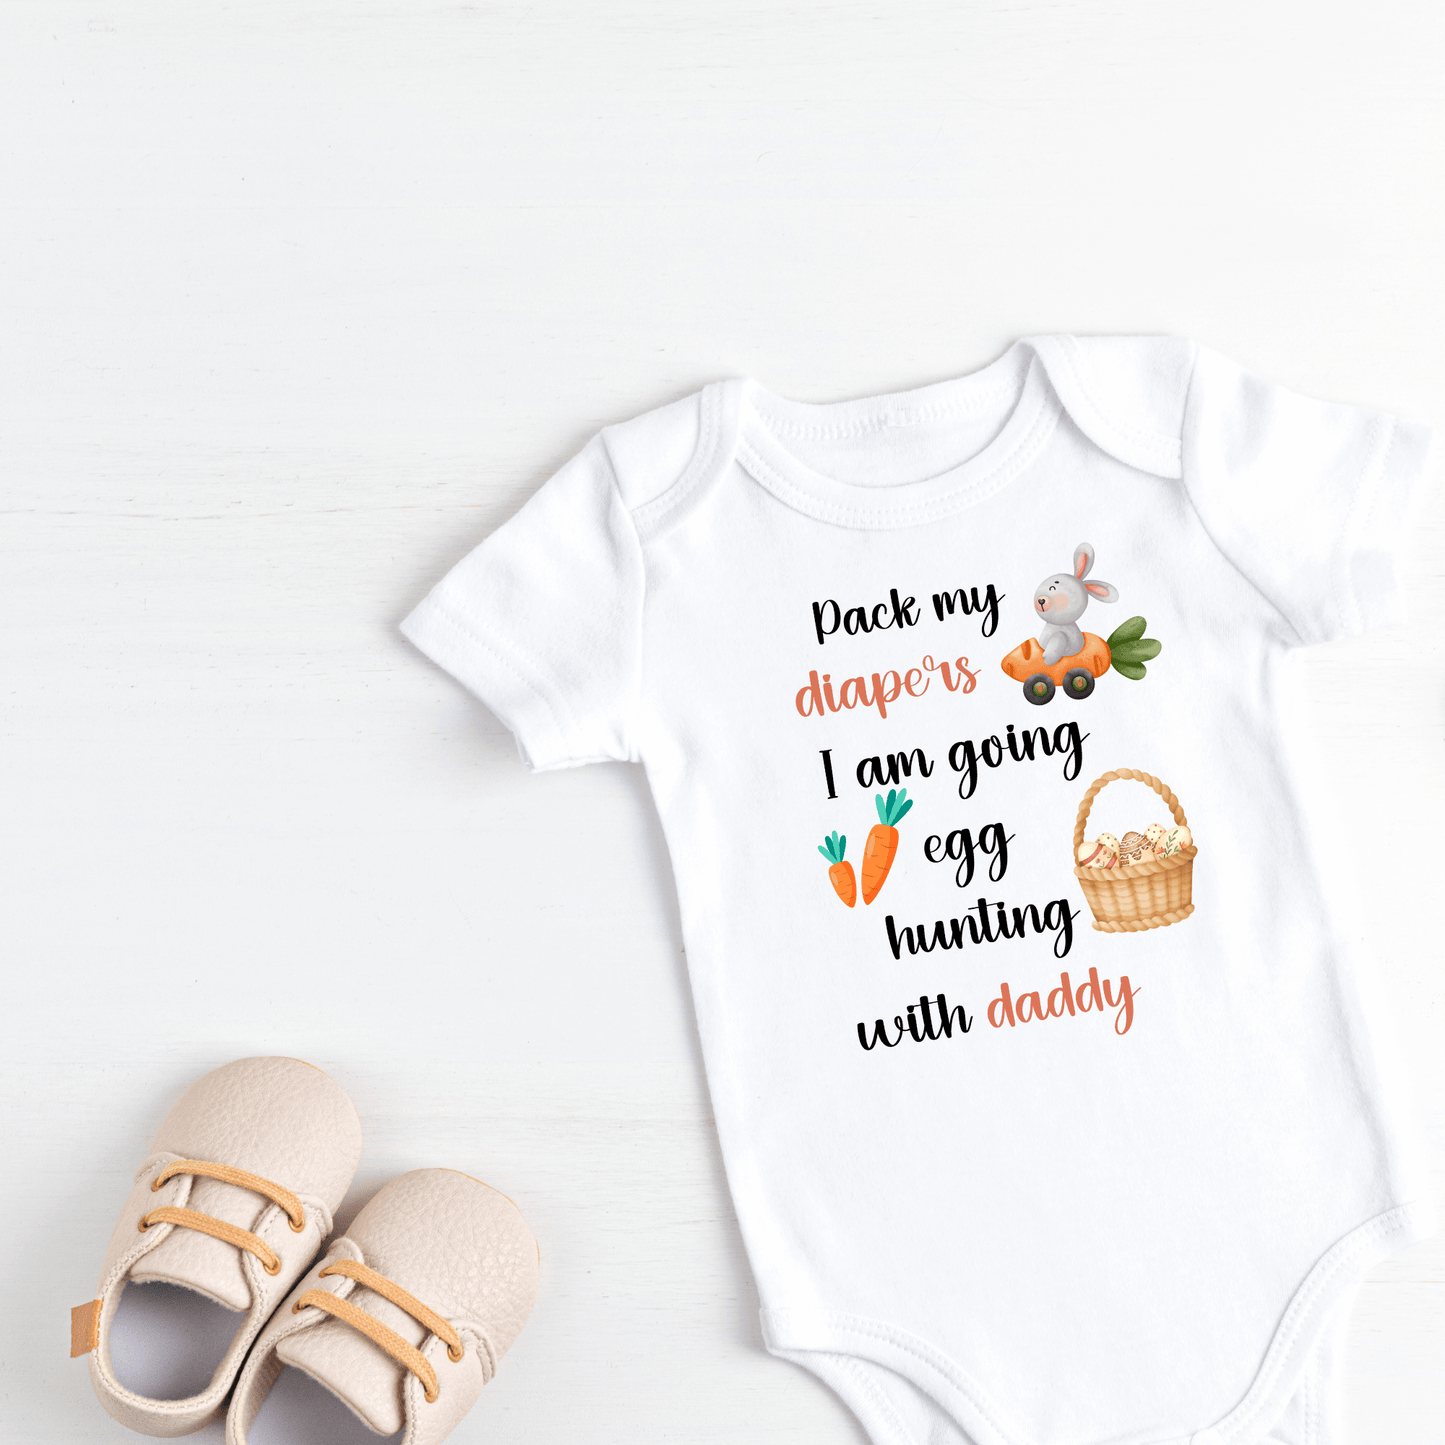 Easter baby clothes, baby easter romper, easter clothing, what to wear for easter, good gift for a baby's first easter, how do you celebrate Easter with a baby, carrots bunny